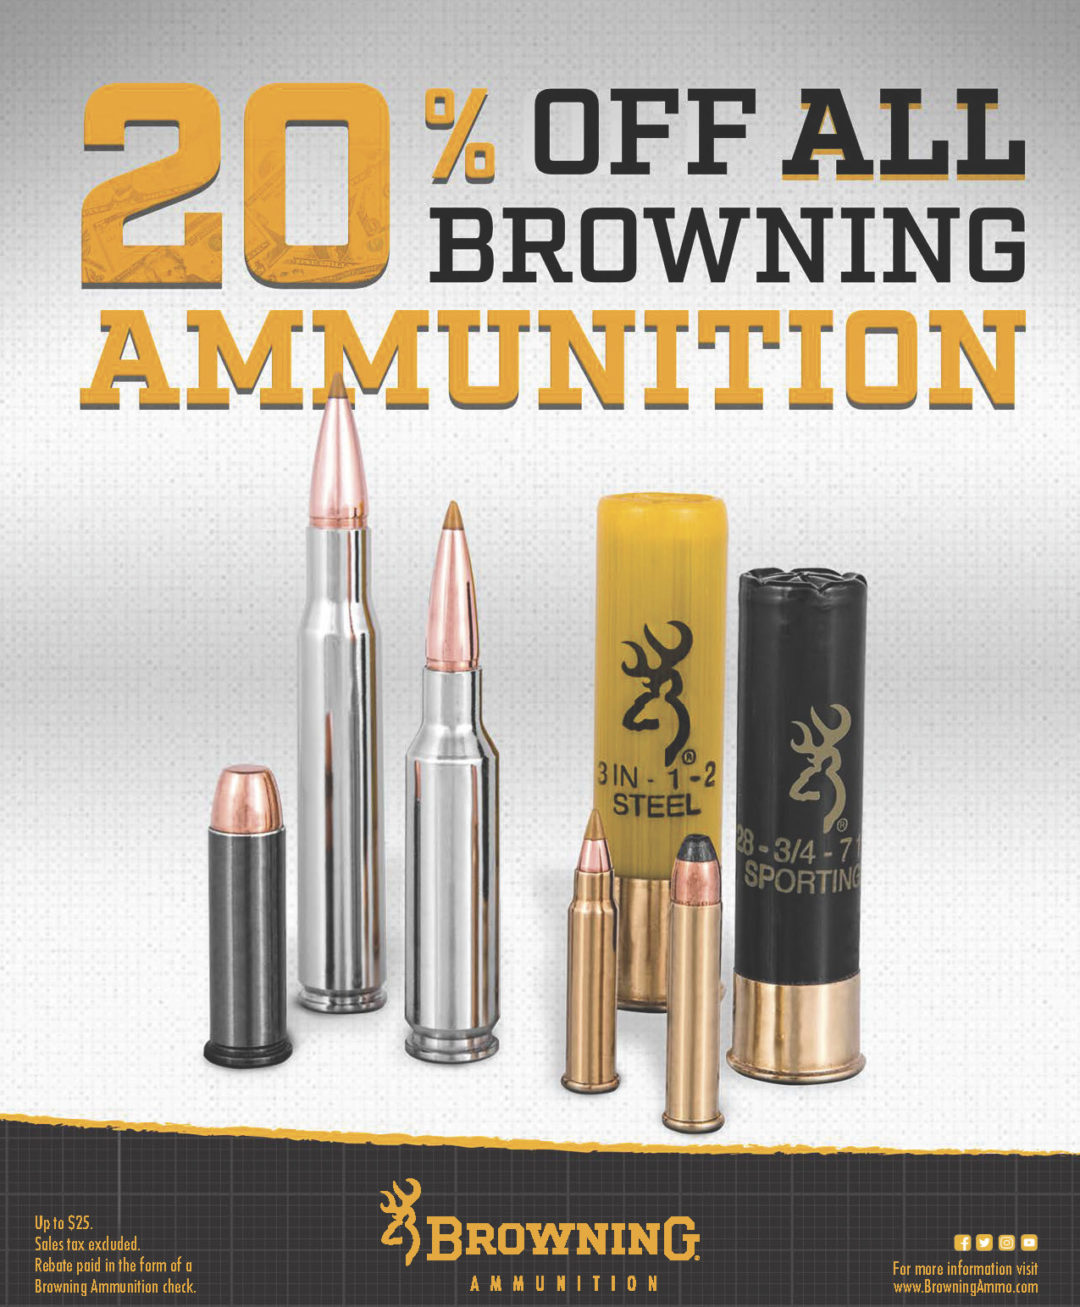 Browning Mail In Rebate Ammo